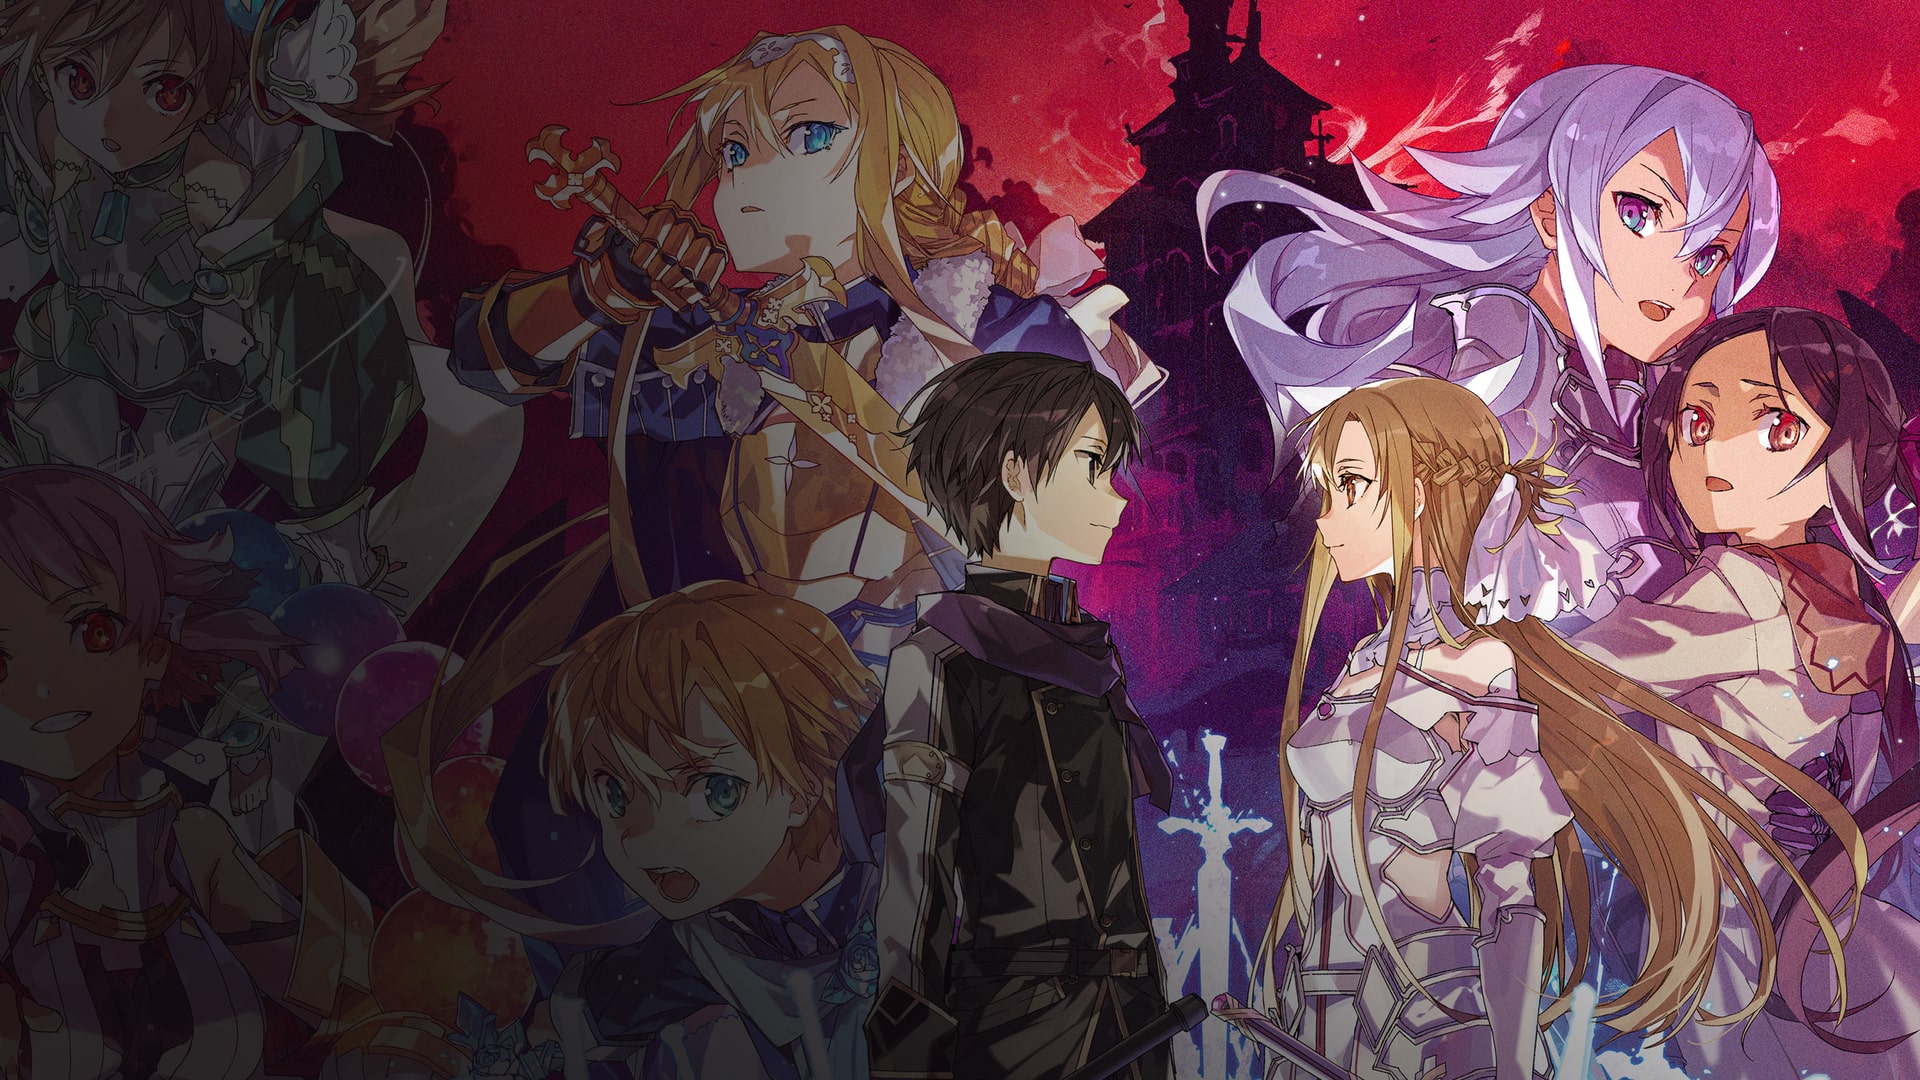  Sword Art Online Last Recollection - PlayStation 5 : Namco:  Everything Else